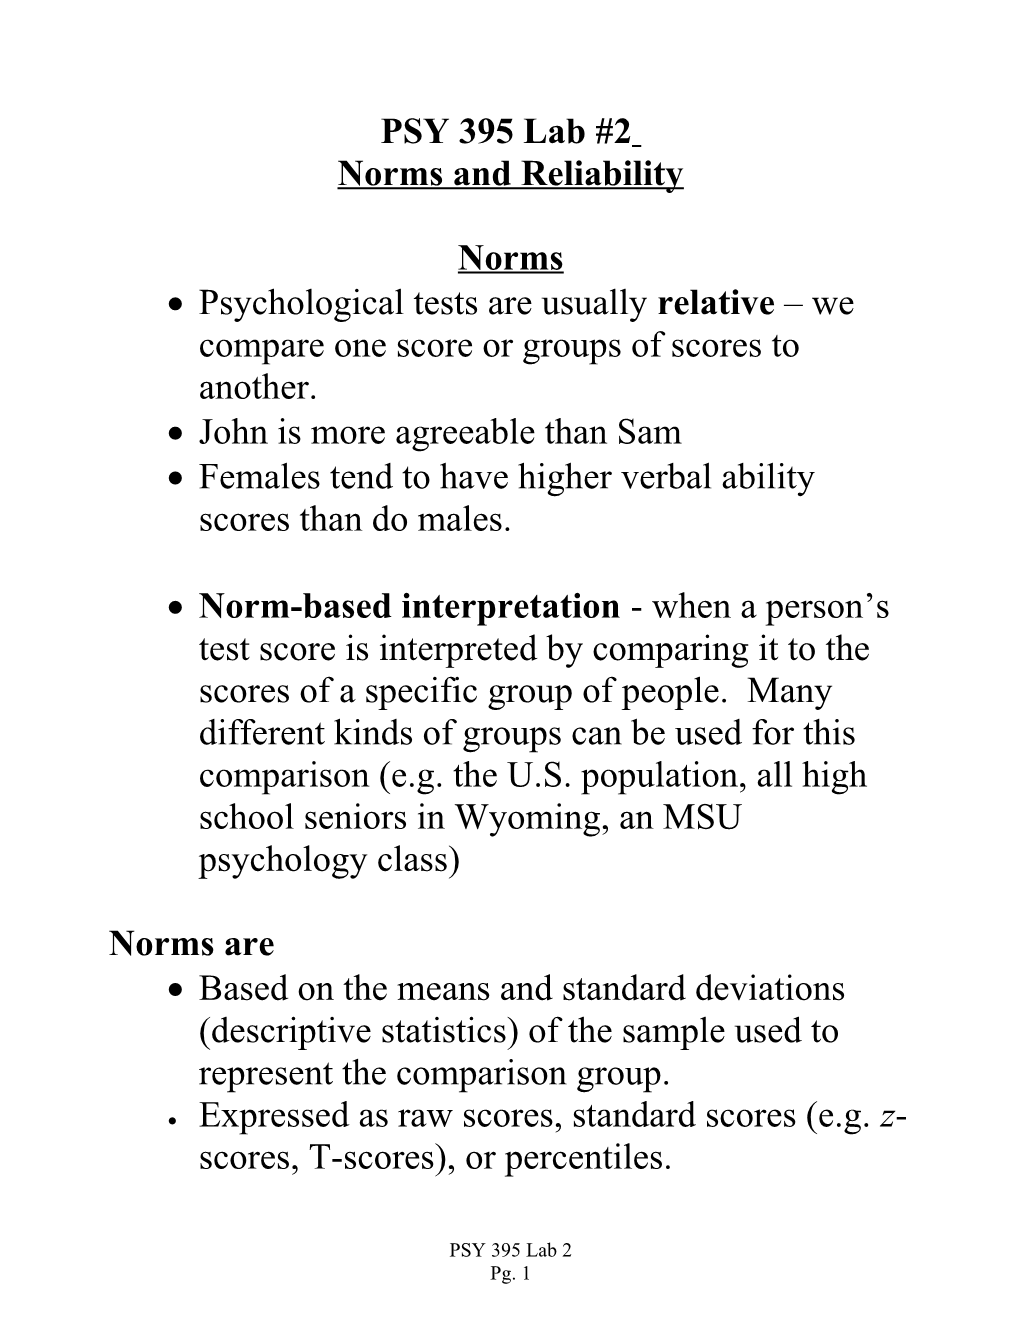 PSY 395 Lab #2 Norms and Reliability